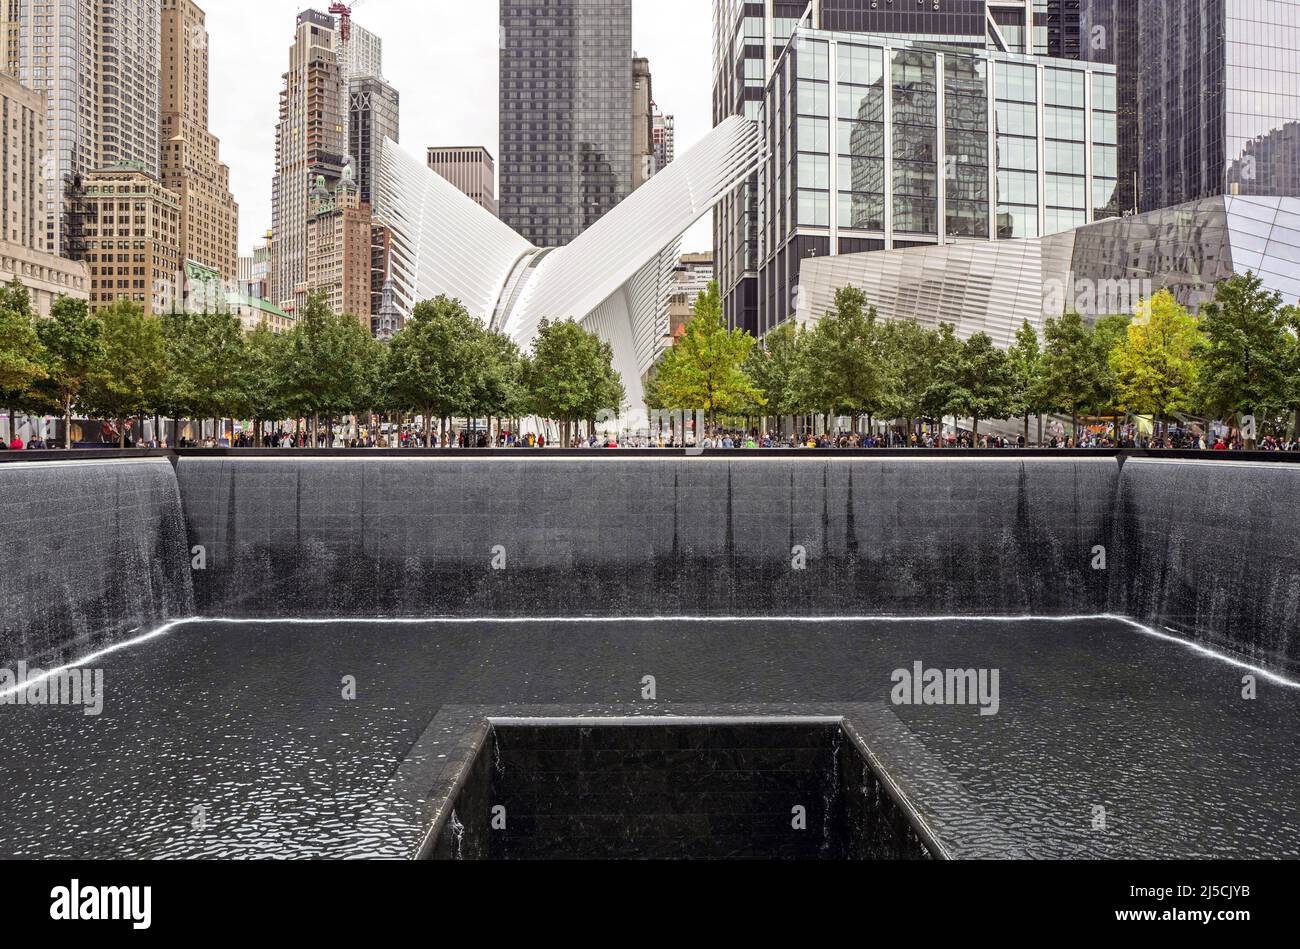 'USA, New York, Oct. 04, 2019. the National 9/11 Memorial in Manhattan on Oct. 08, 2019. the 9/11 Memorial is a memorial commemorating the approximately 3,000 victims of the Sept. 11, 2001 terrorist attacks and the 1993 World Trade Center bombing. In the background: Calatrava's Oculus train station. The World Trade Center transportation hub 'Oculus NYC' designed by Santiago Calatrava is conceived at street level as a freestanding structure located on an axis along the southern edge of the ''Wedge of Light'' plaza. [automated translation]' Stock Photo